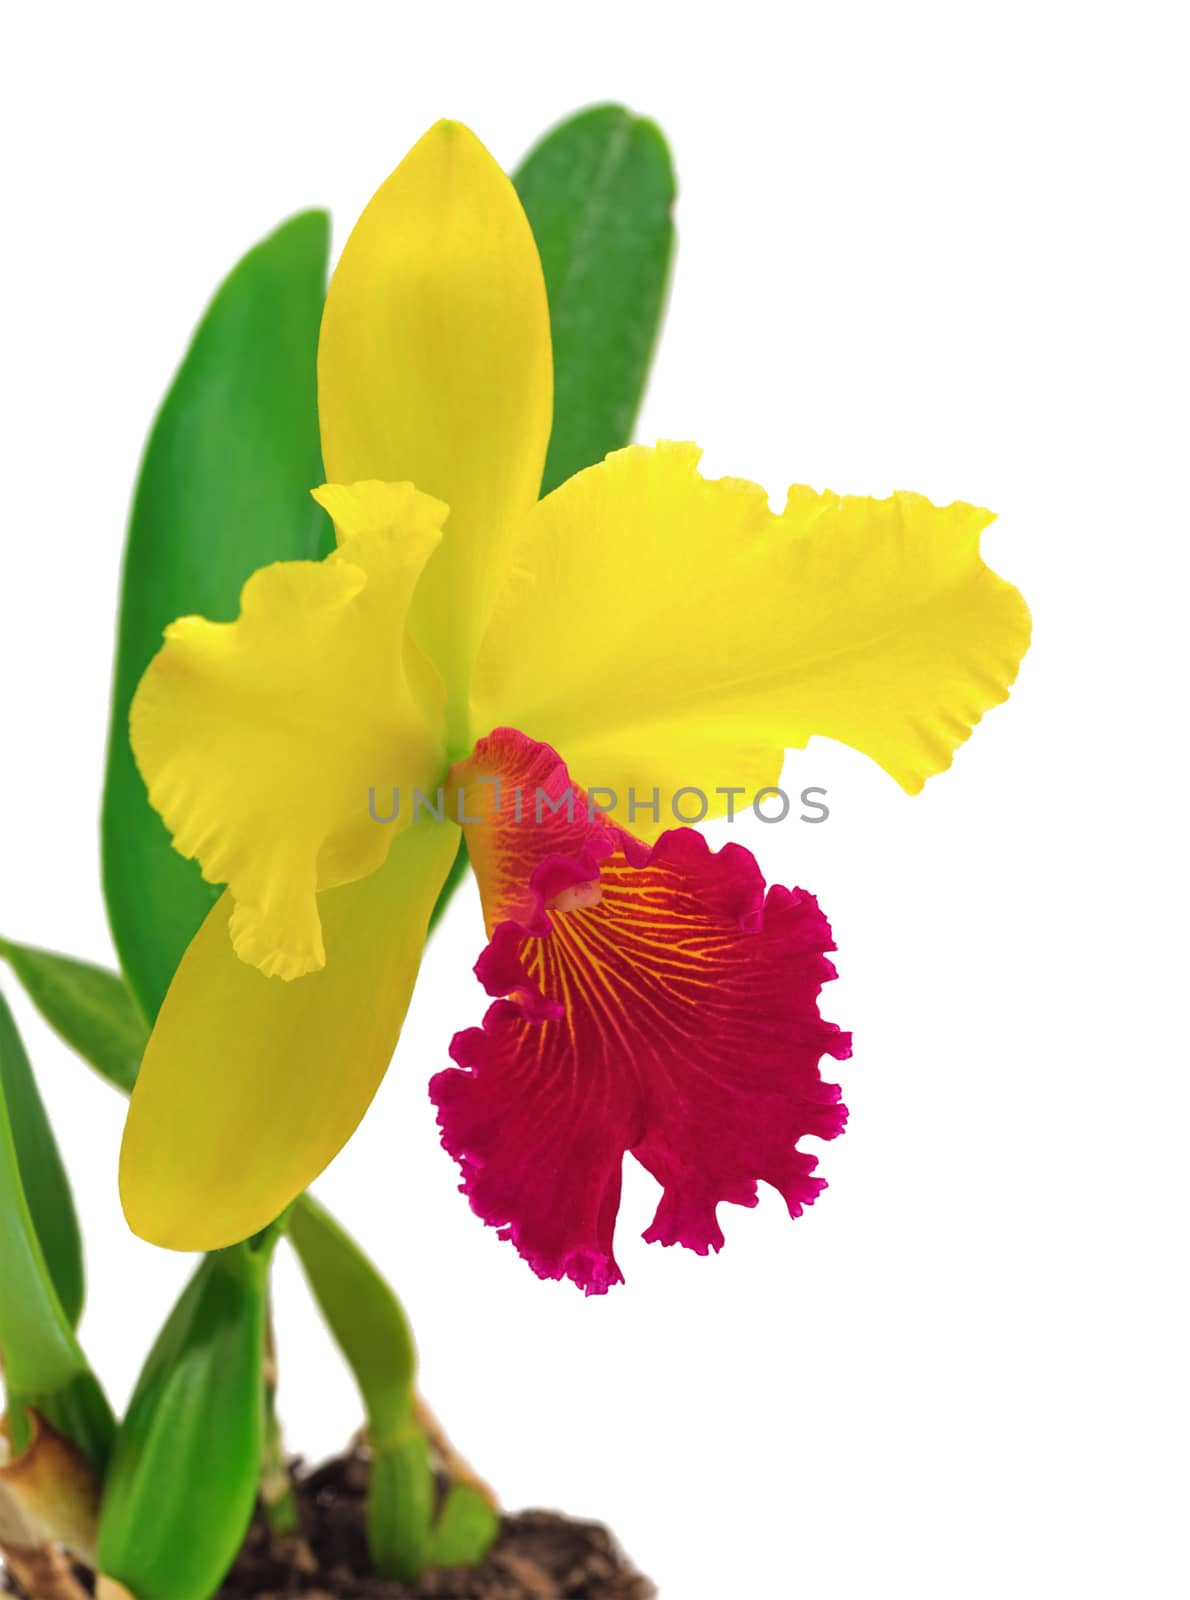 Cattleya orchid isolated on a white background by hemerocallis